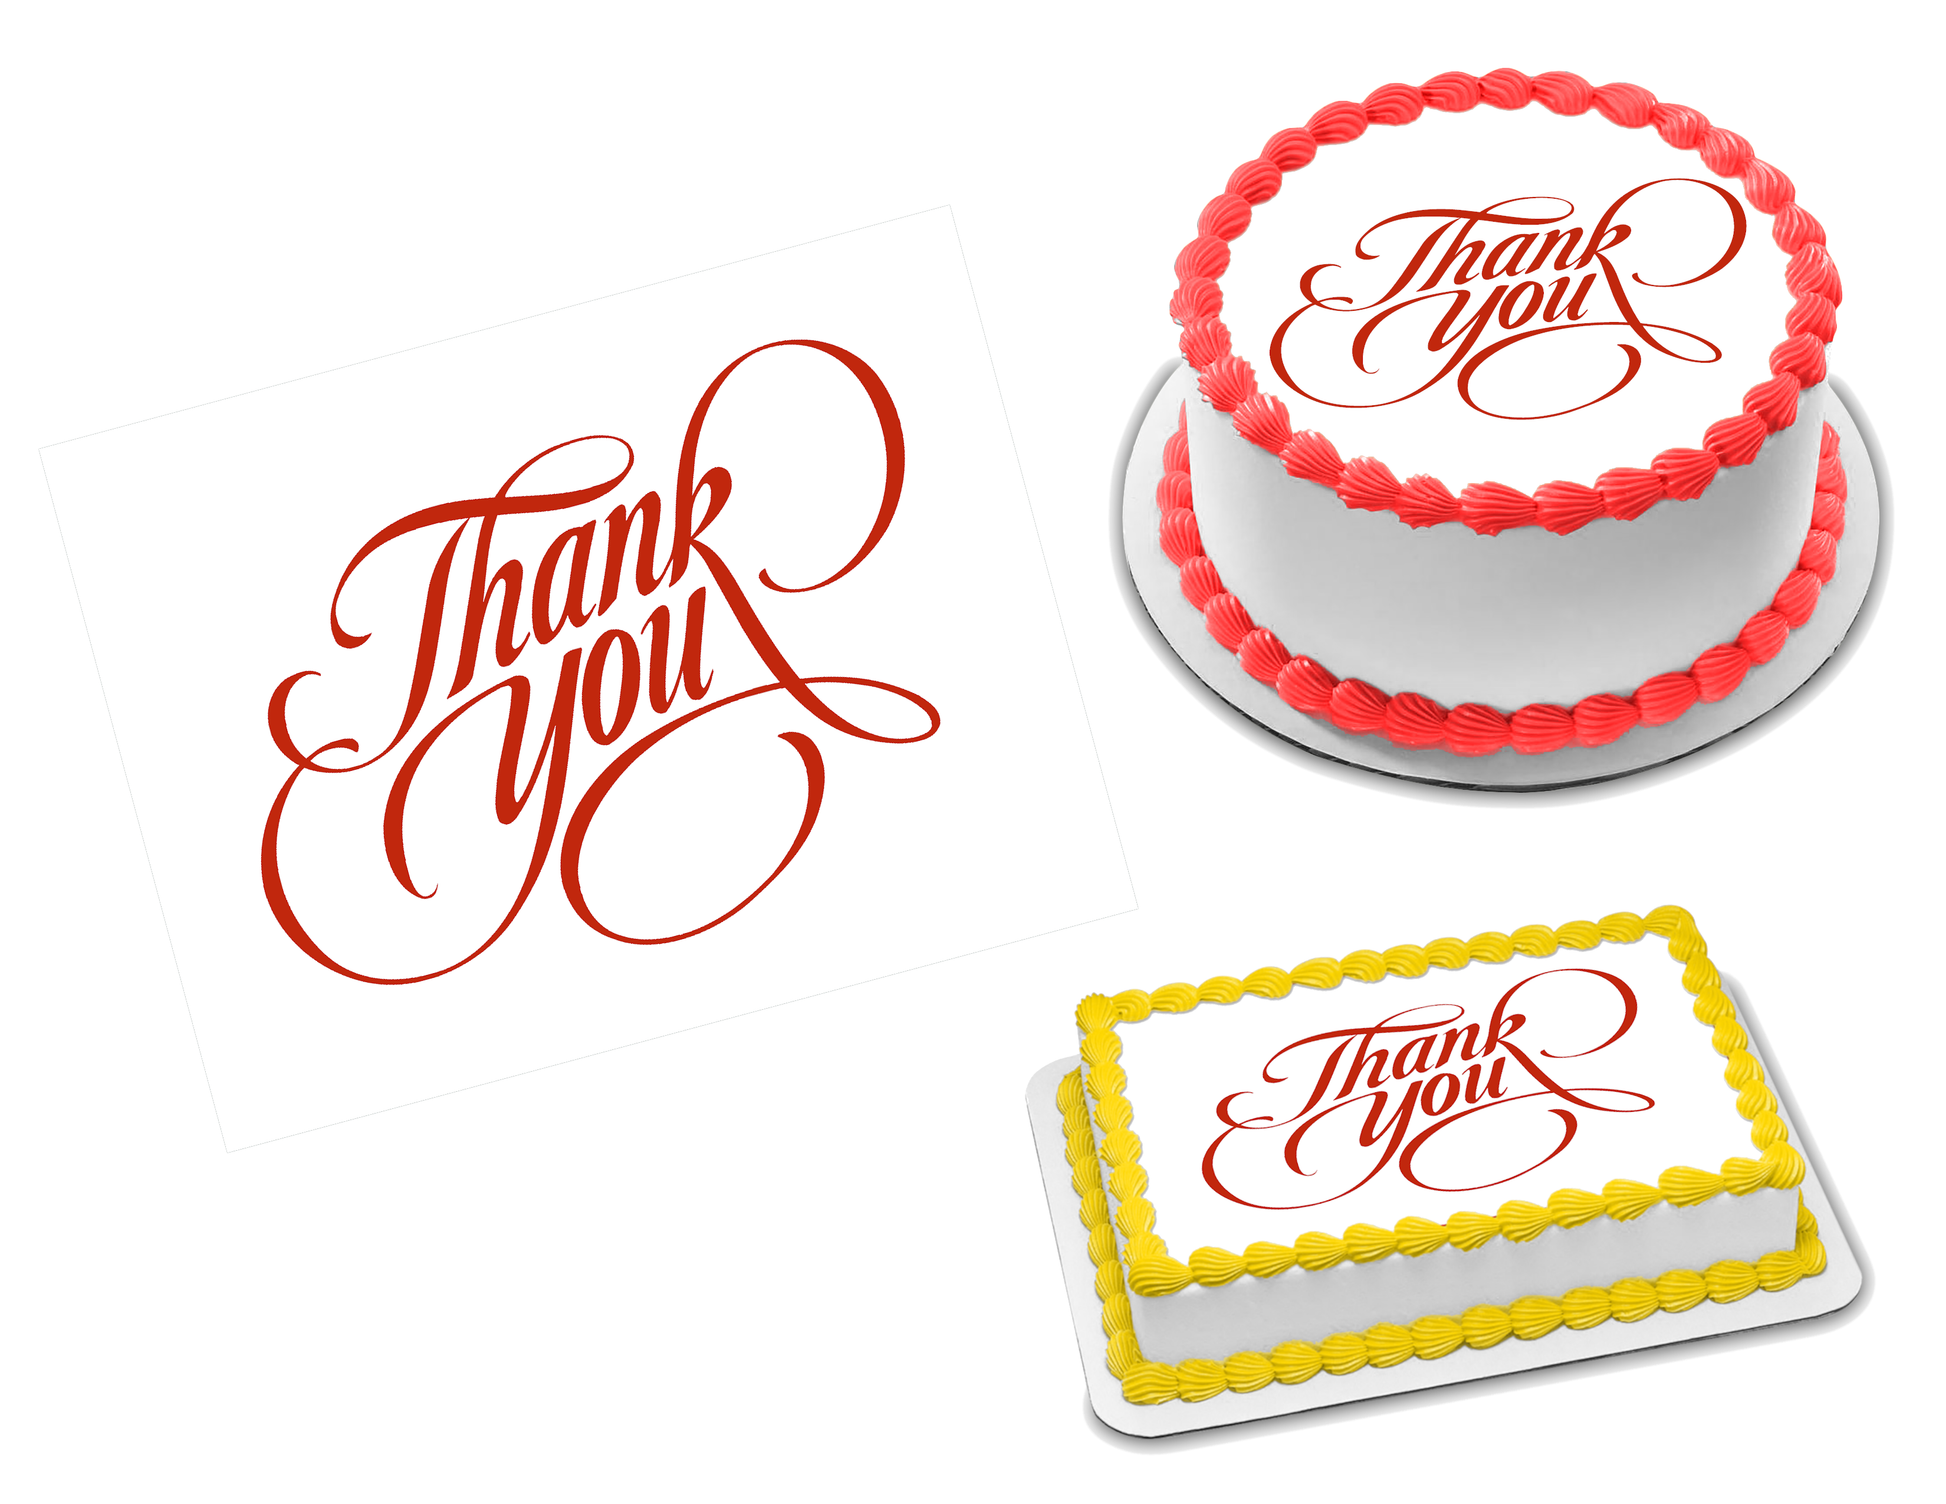 Thank You Calligraphy Red Edible Image Frosting Sheet #6 (70+ sizes)